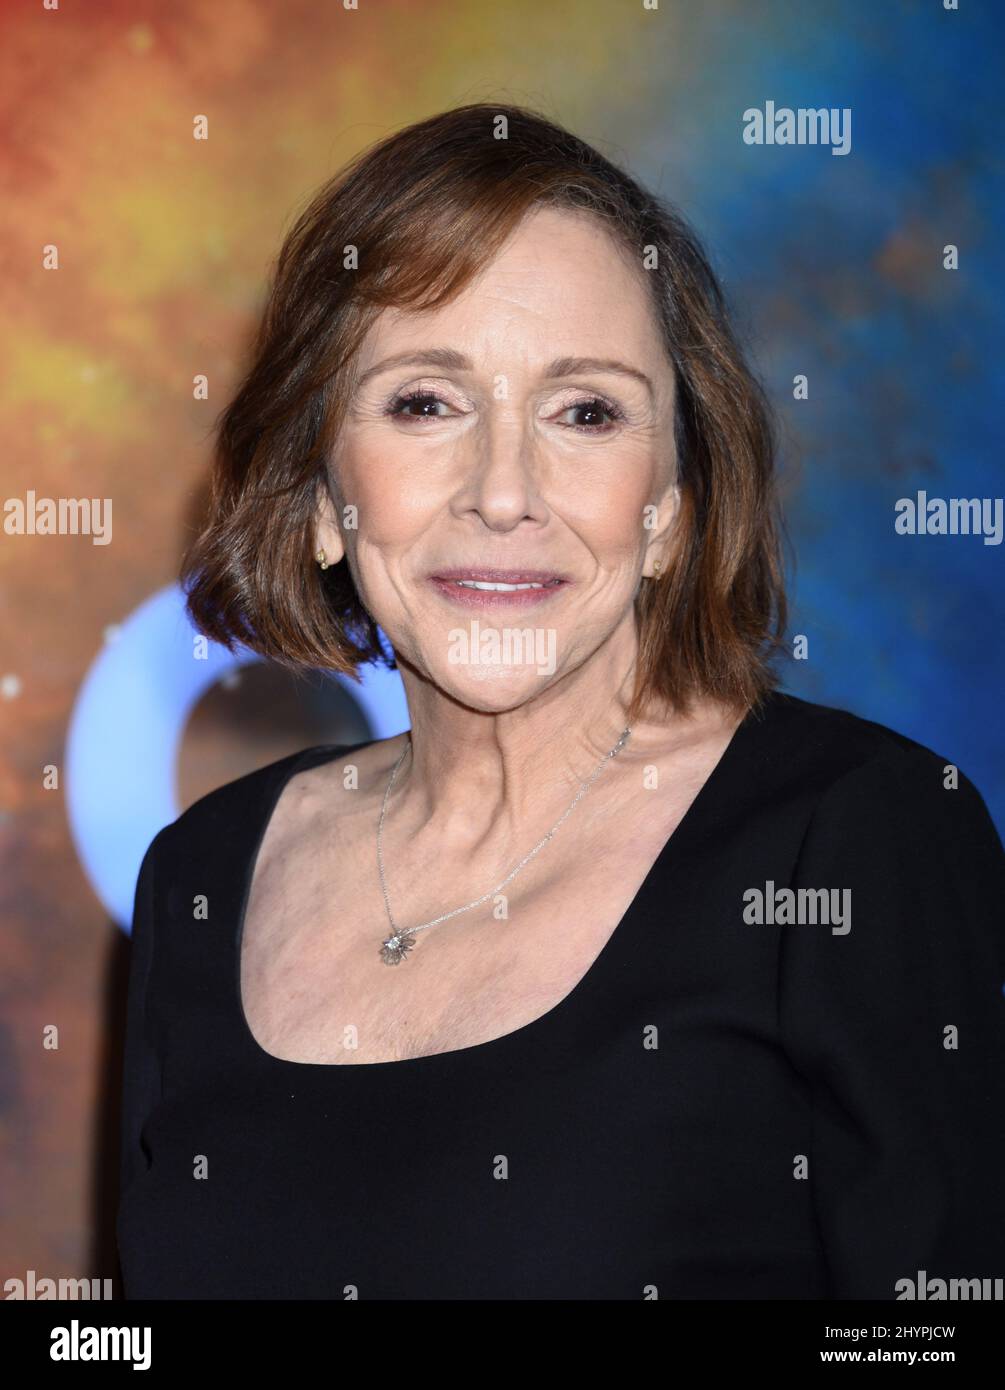 Ann Druyan at National Geographic's 'Cosmos: Possible Worlds' Los Angeles Premiere held at Royce Hall UCLA on February 26, 2020 in Los Angeles. Stock Photo